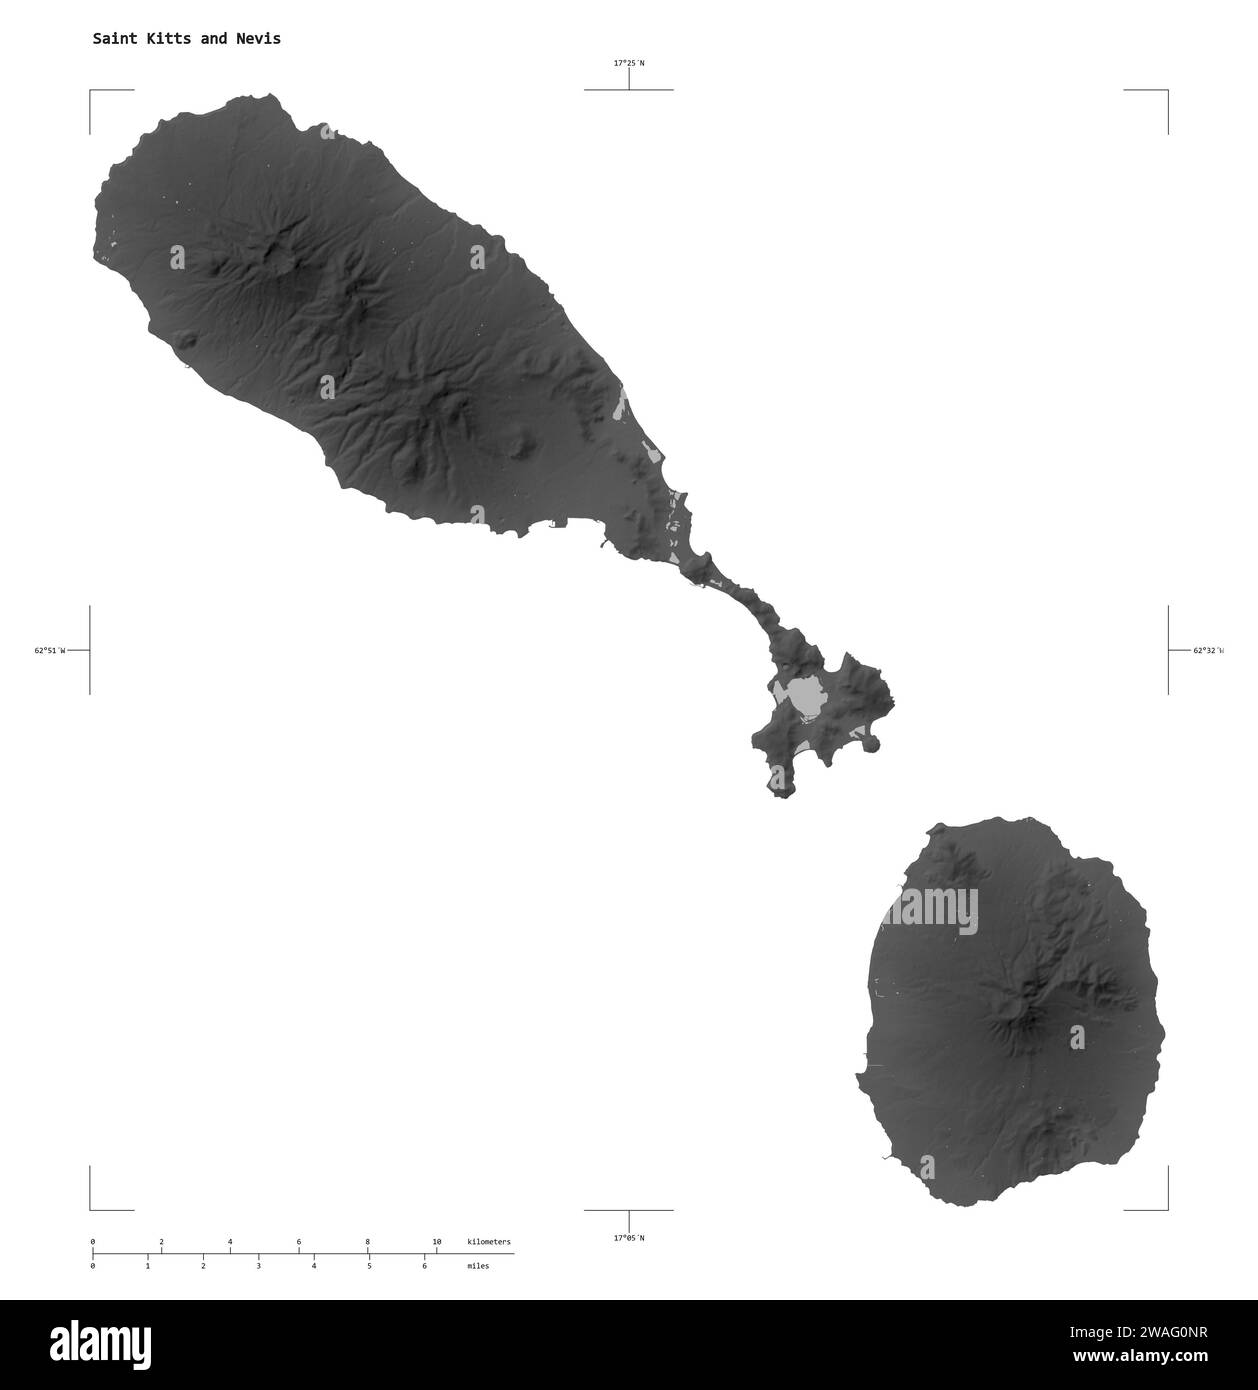 Shape of a Grayscale elevation map with lakes and rivers of the Saint Kitts and Nevis, with distance scale and map border coordinates, isolated on whi Stock Photo